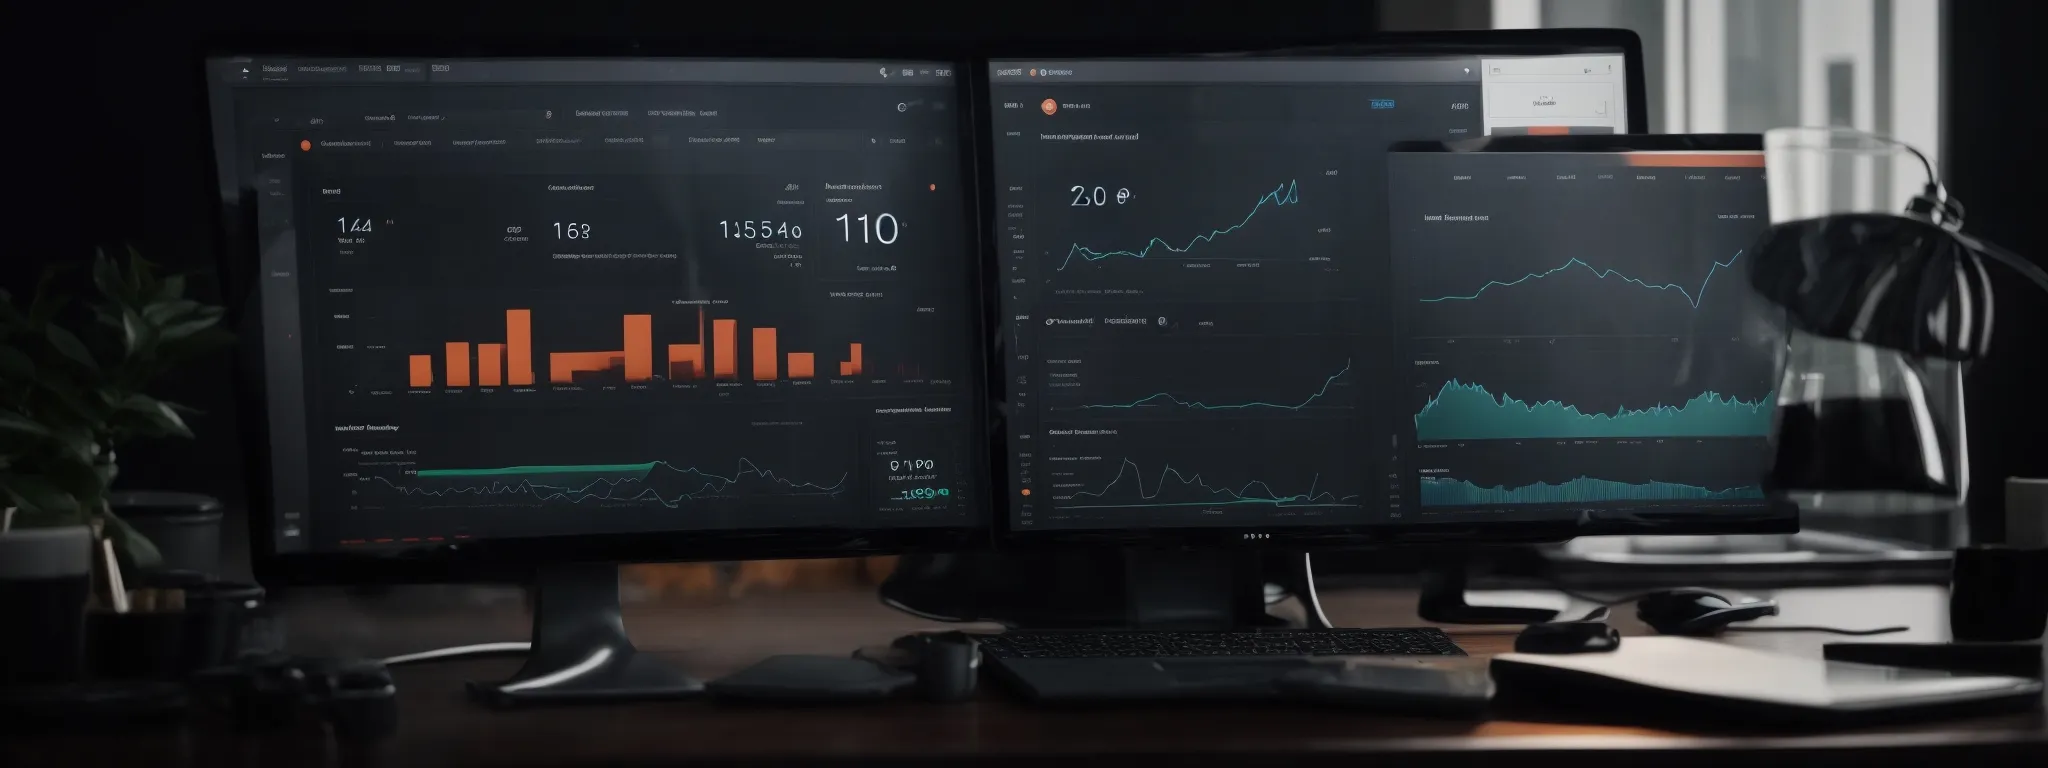 a sleek computer dashboard displaying seo analytics with uptrend graphs symbolizing improved website performance.